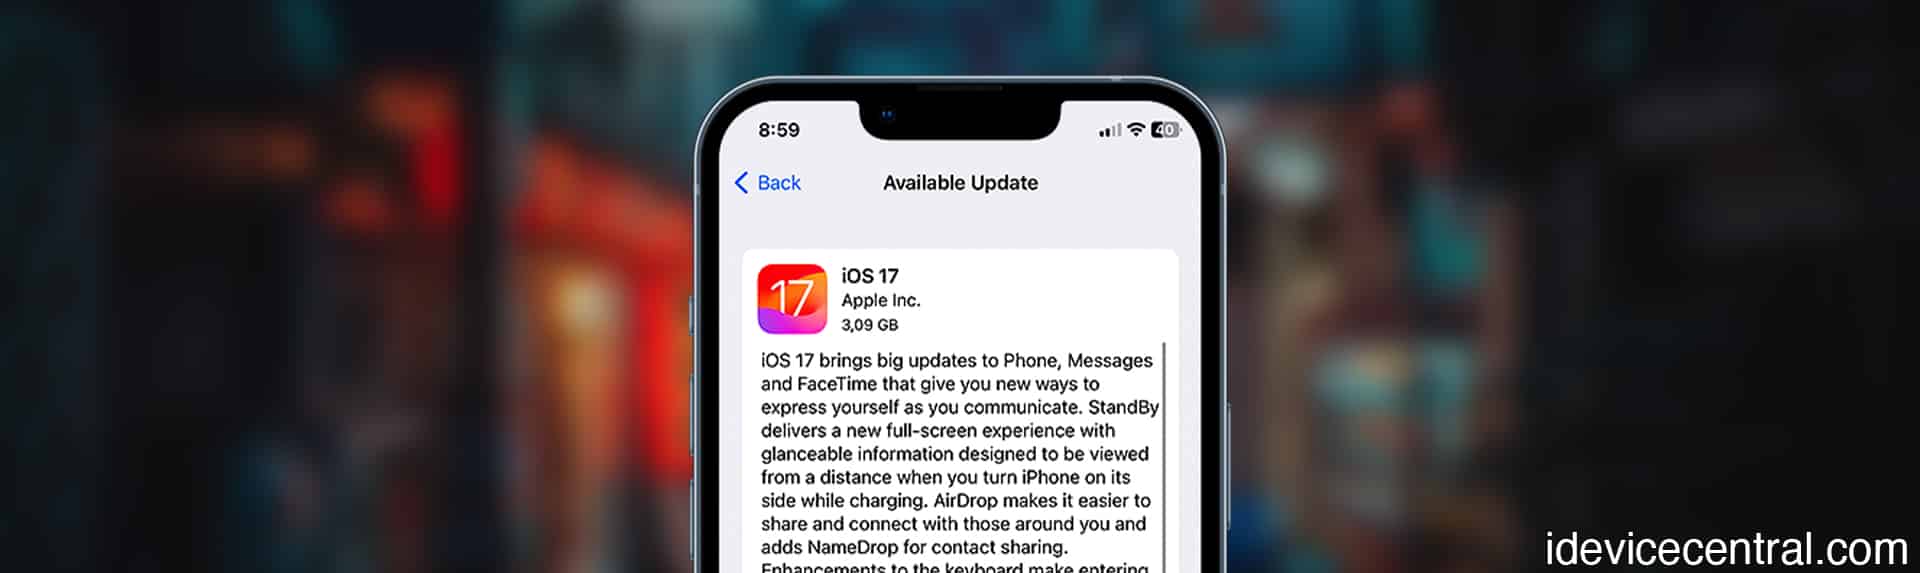 iOS 17.0 was officially RELEASED! Apple releases iOS 17 along with iPhone 15